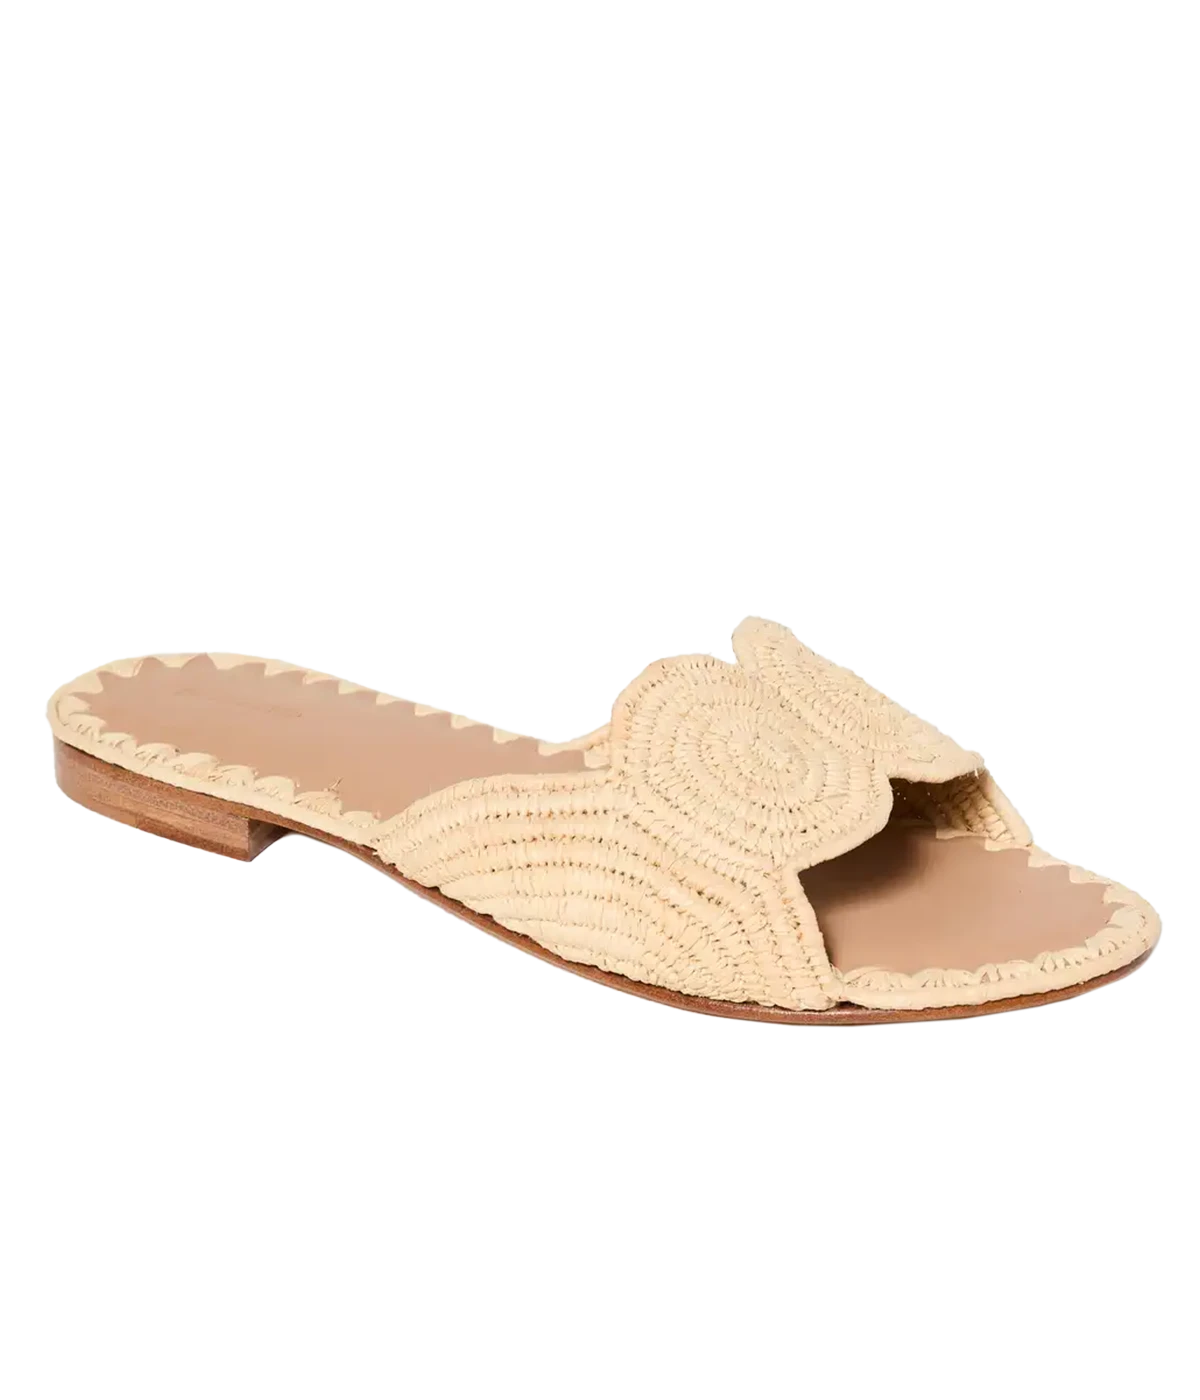 Raffia upper open-toe slip-on sandal. Leather lining and sole, handmade in Morrocco. Summer footwear, perfect for the beach and going out. 